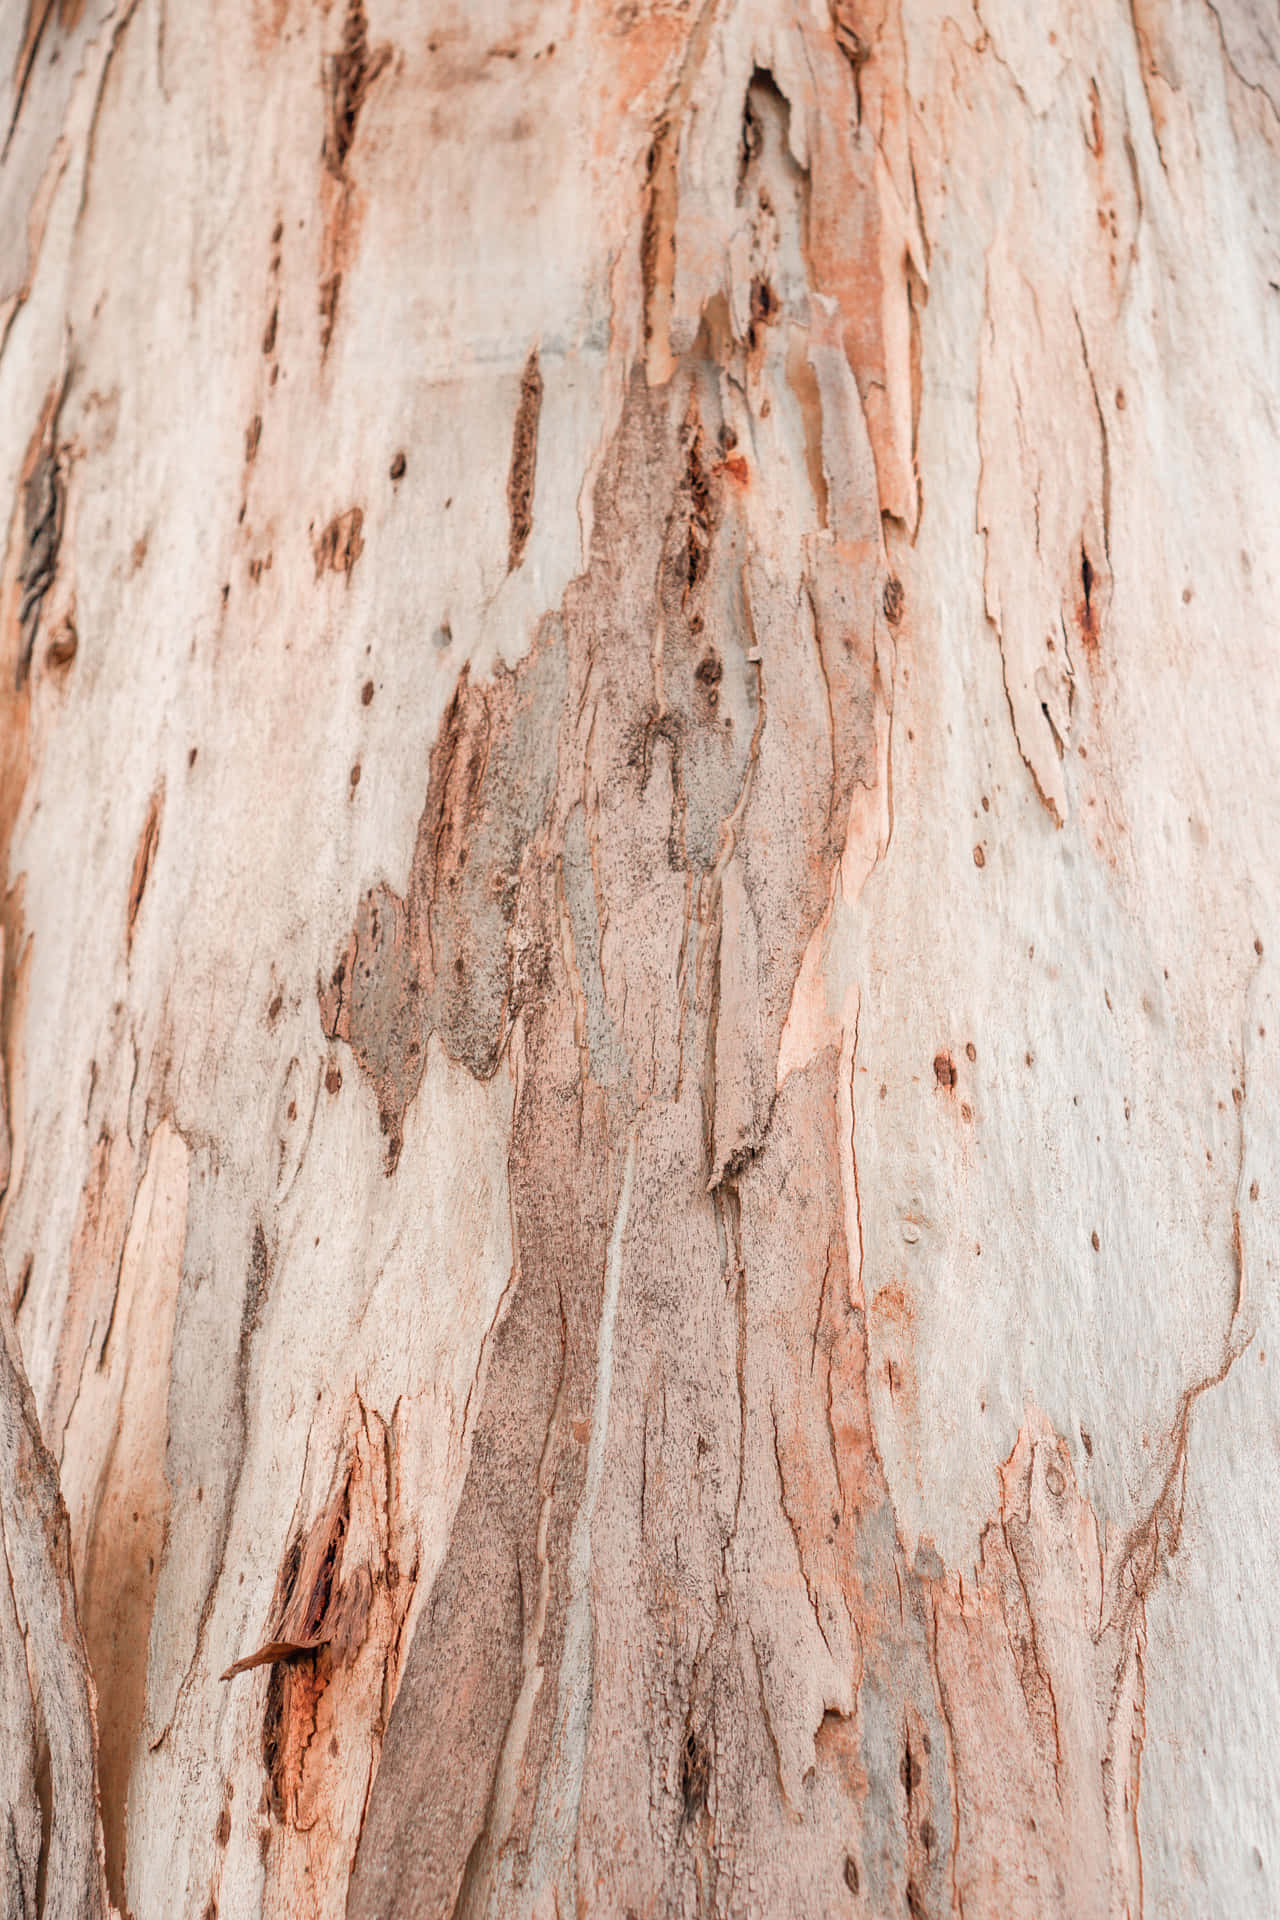 A Close Up Of The Bark Of A Tree